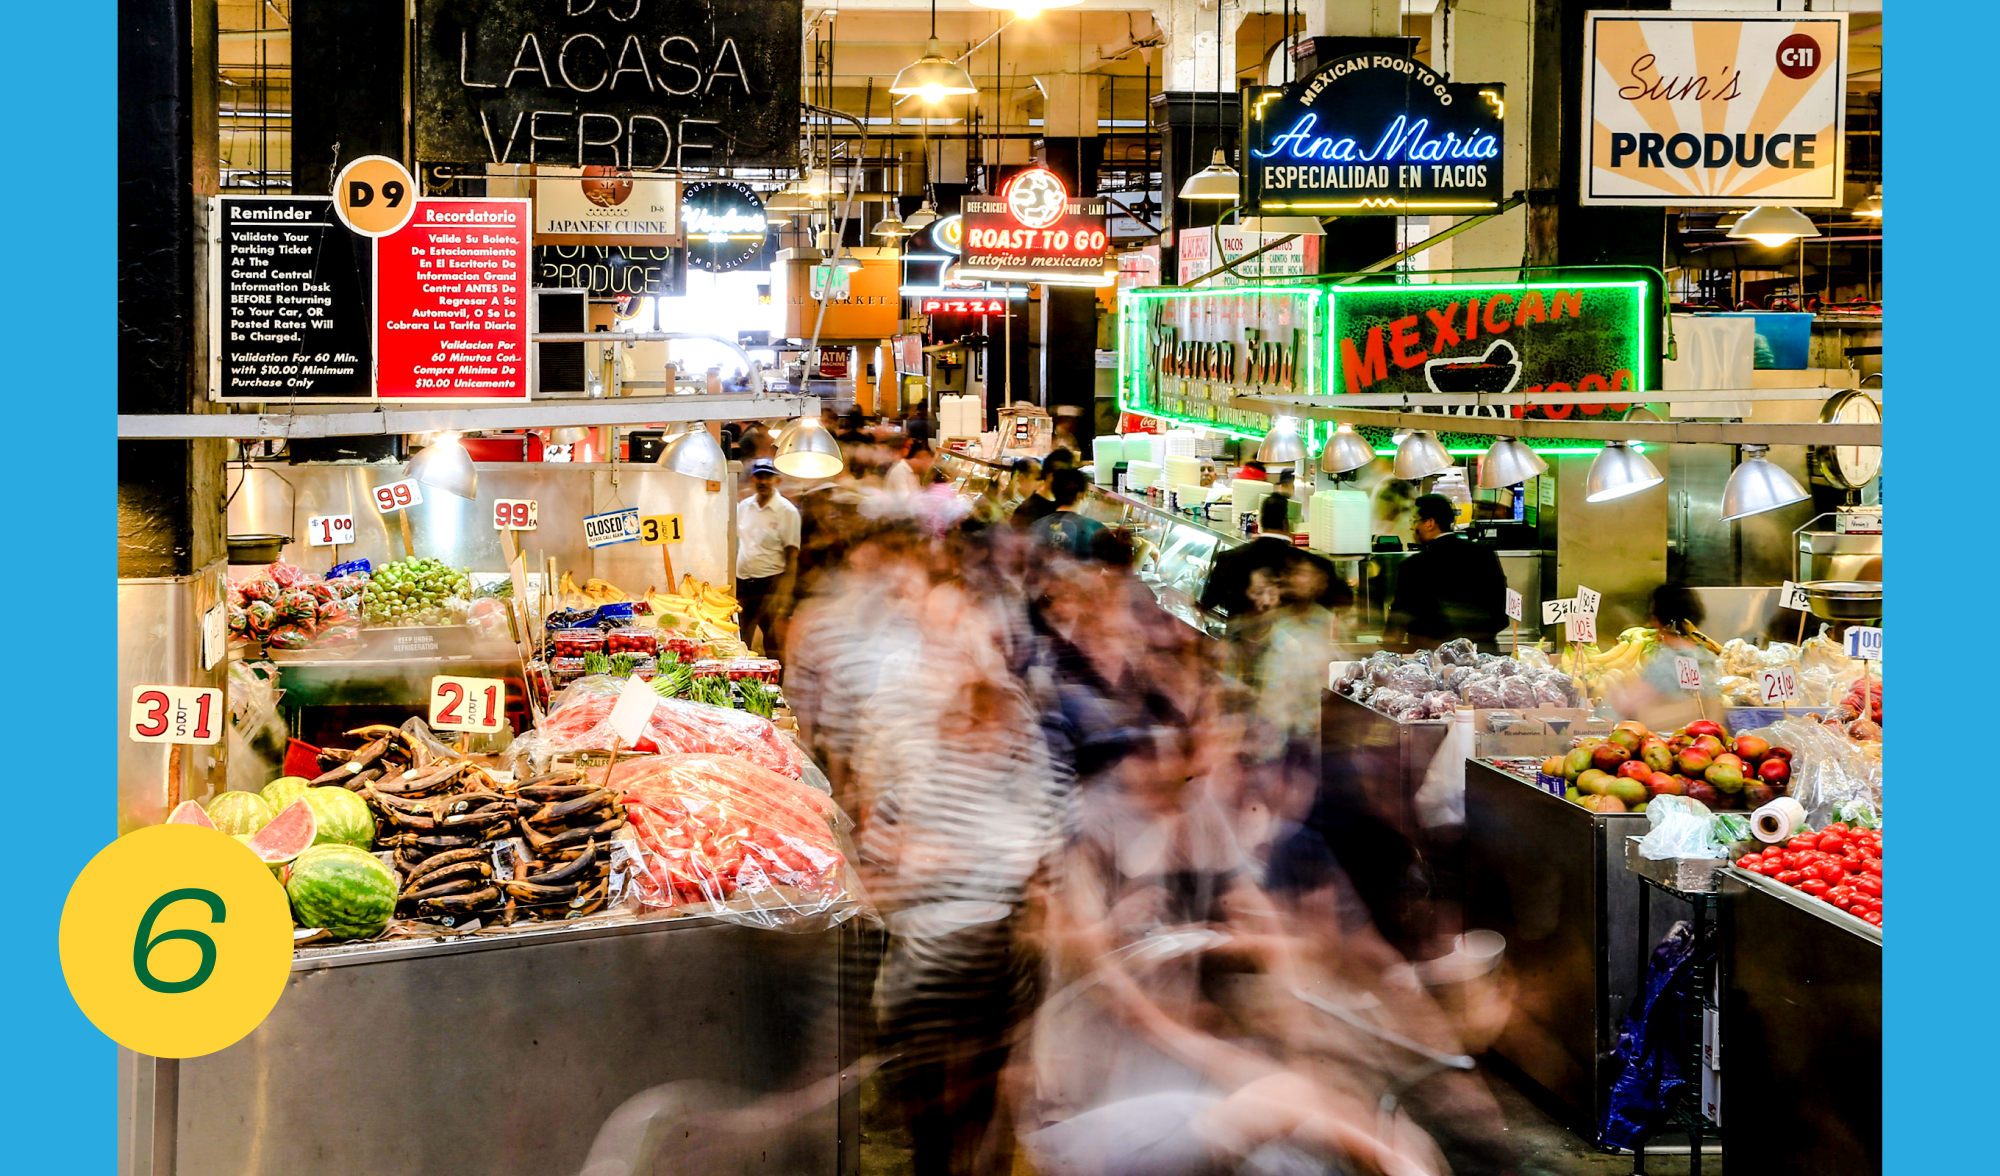 Customers move among the vendor stalls at Grand Central Market in downtown Los Angeles.